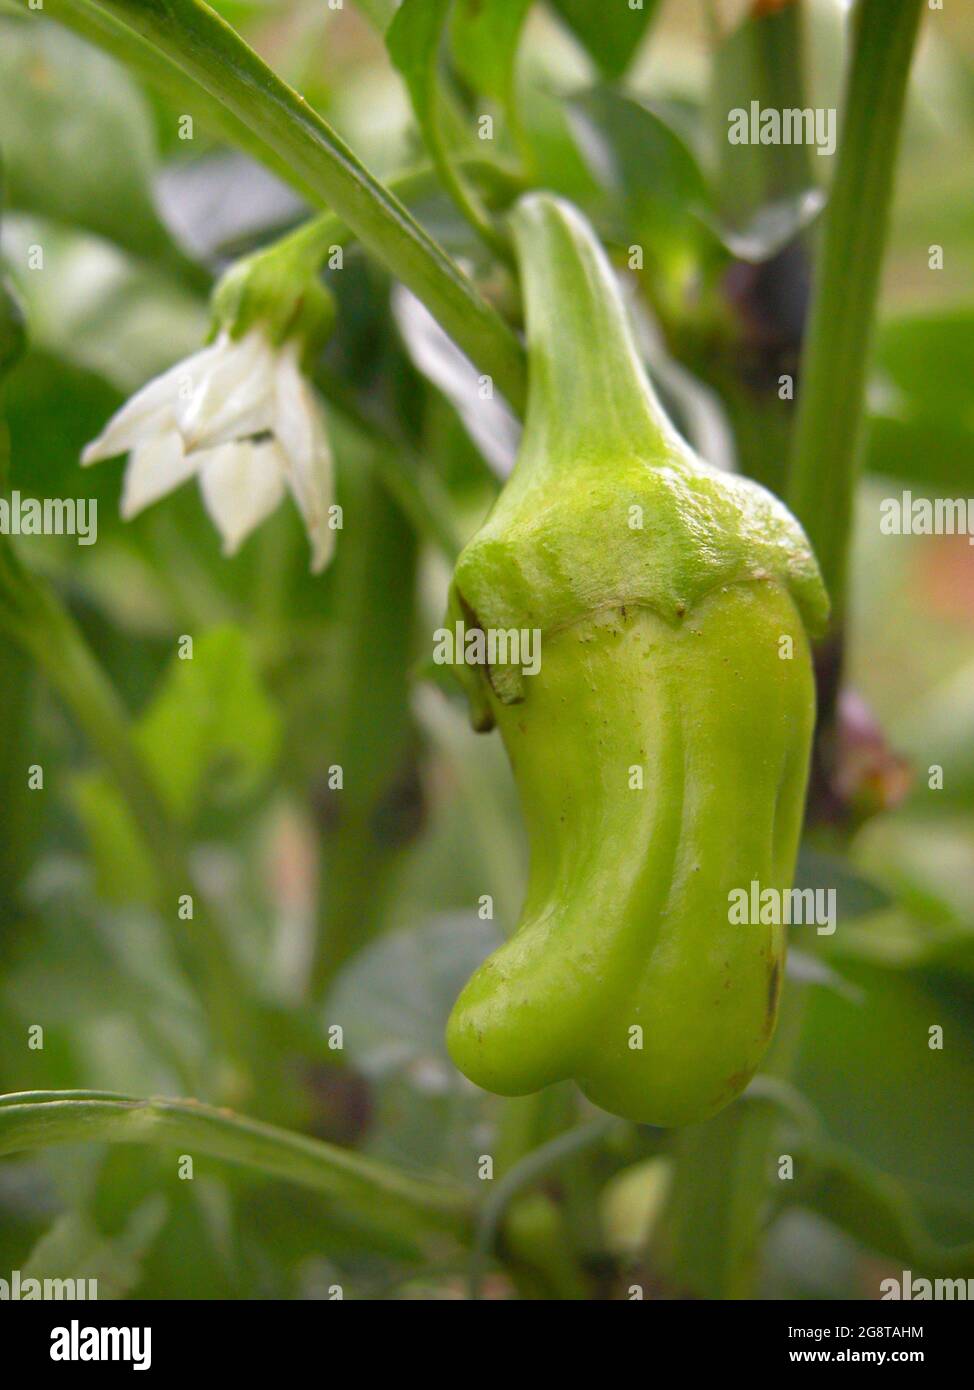 chili pepper, paprika (Capsicum annuum), green pepper and flower on the plant Stock Photo